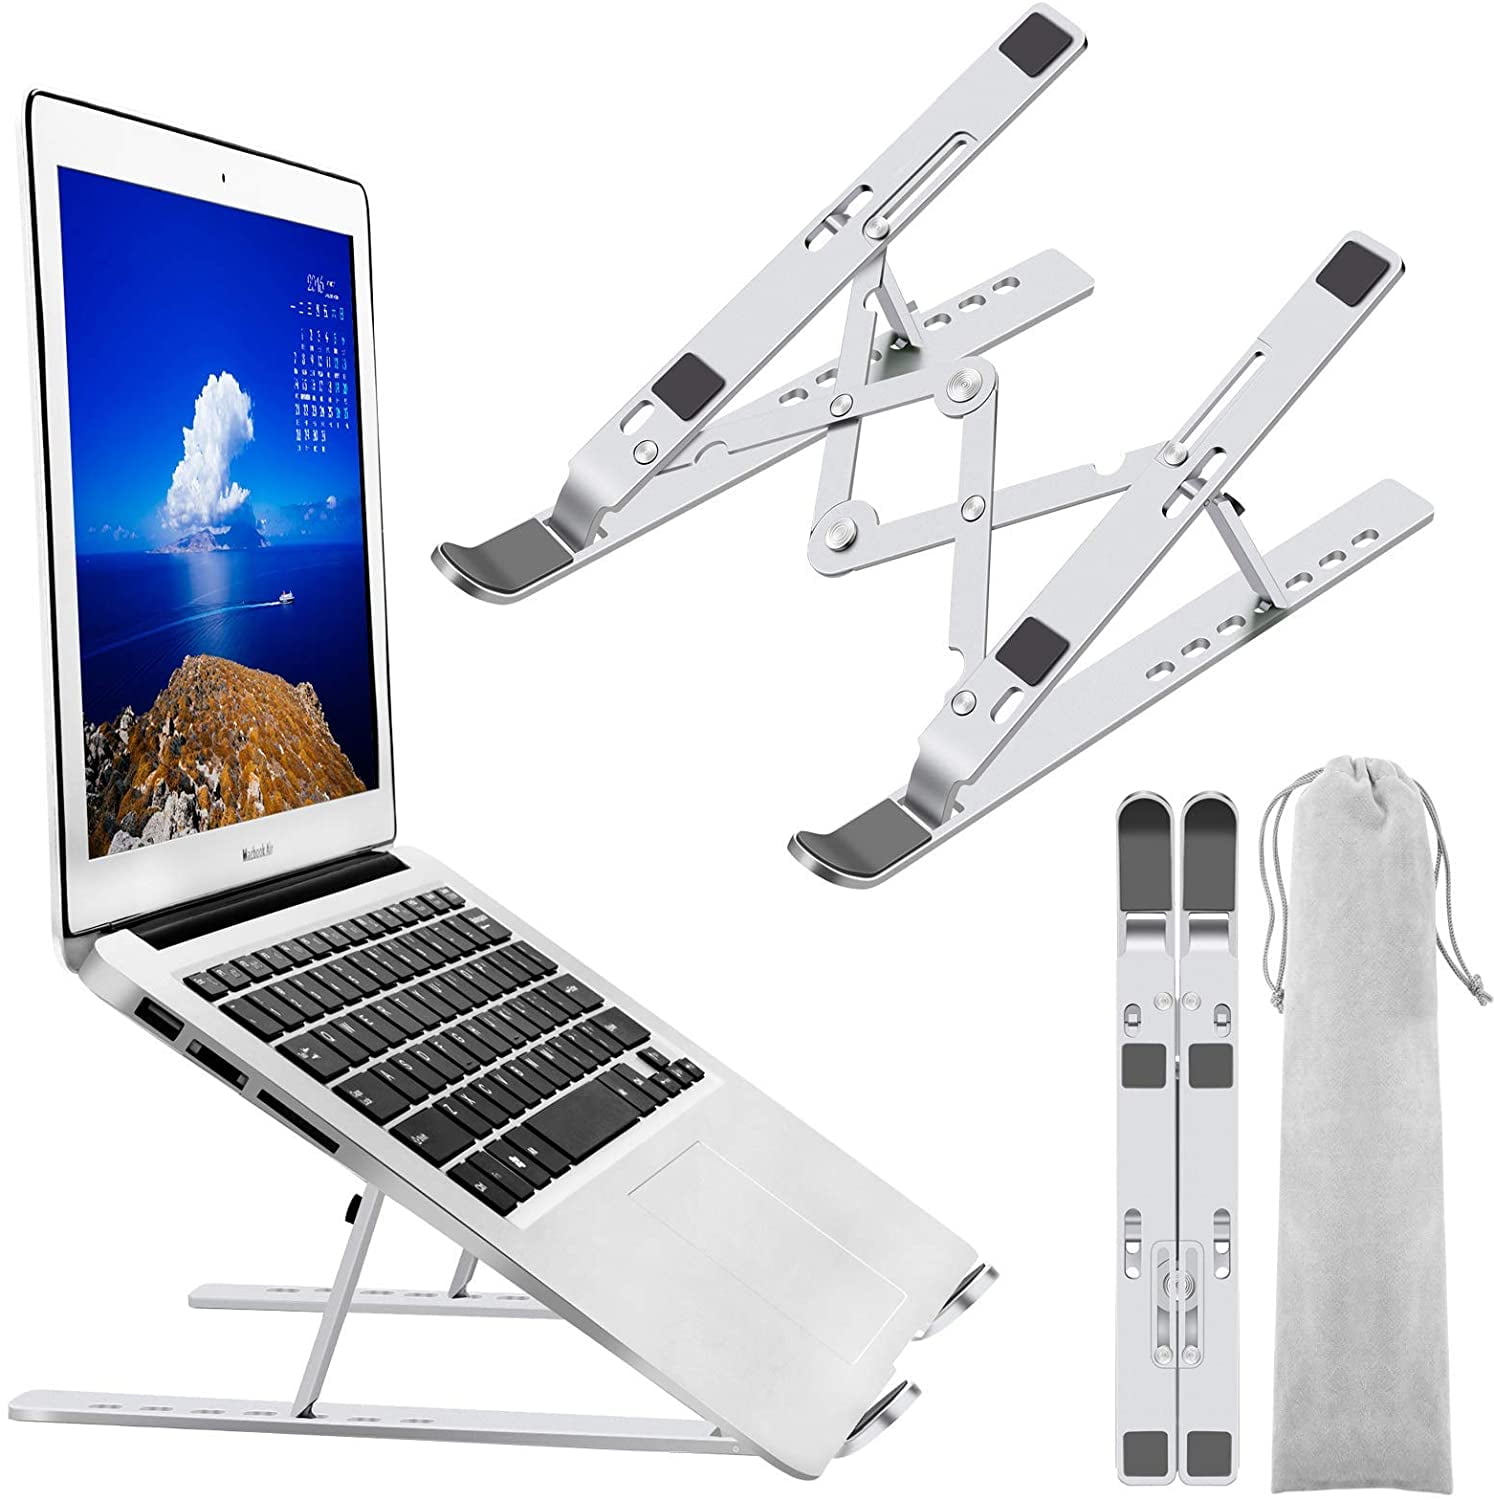 Silver Laptop Stand Adjustable Aluminum Foldable Portable Notebook Stand More 10-15.6” Laptops and Tablets HP Lenovo Laptop Holder Riser Computer Stand Dell Compatible with MacBook Air Pro